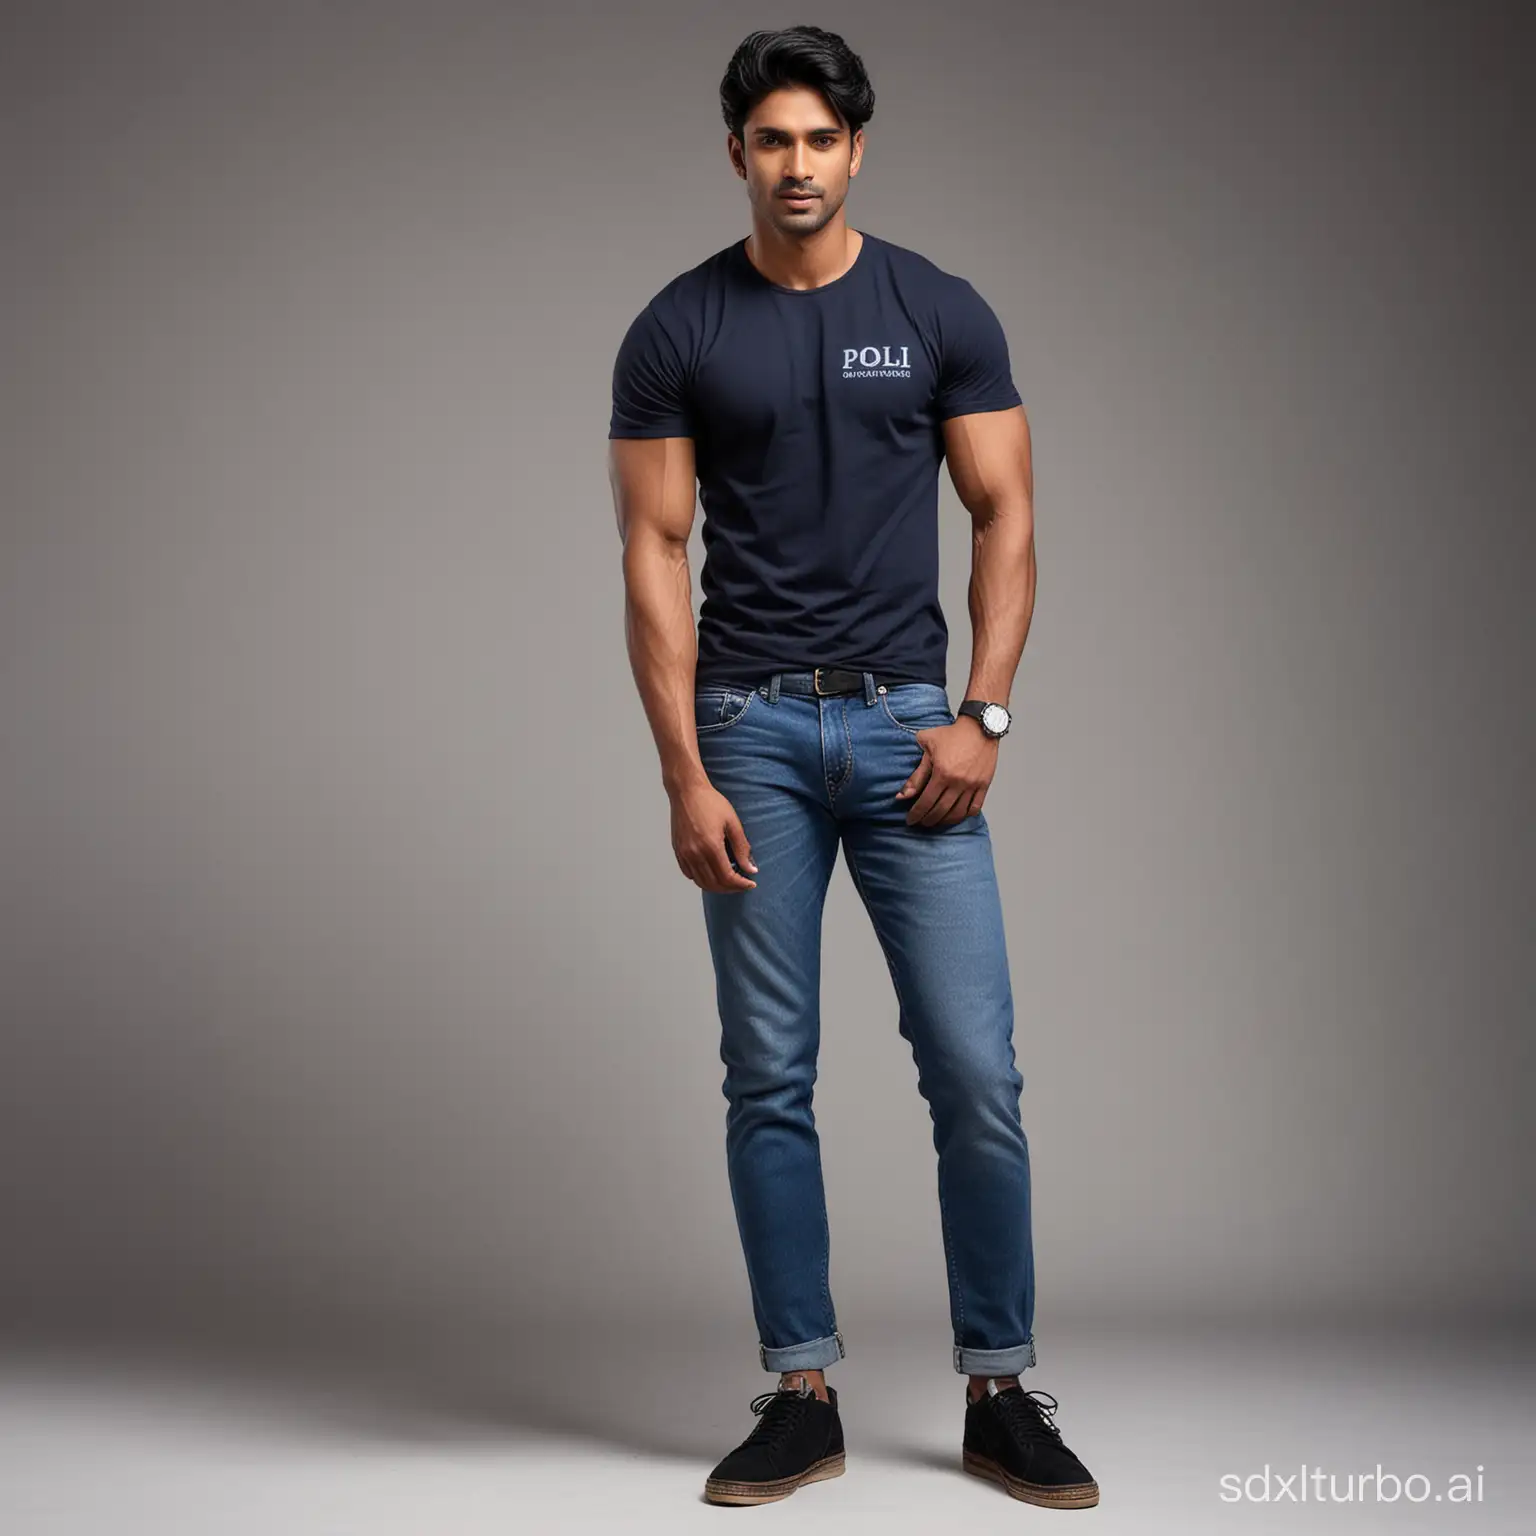 Indian male,tall dark handsom,black hair,lean muscular, wearing a poli tshirt blue jeans and black shoes